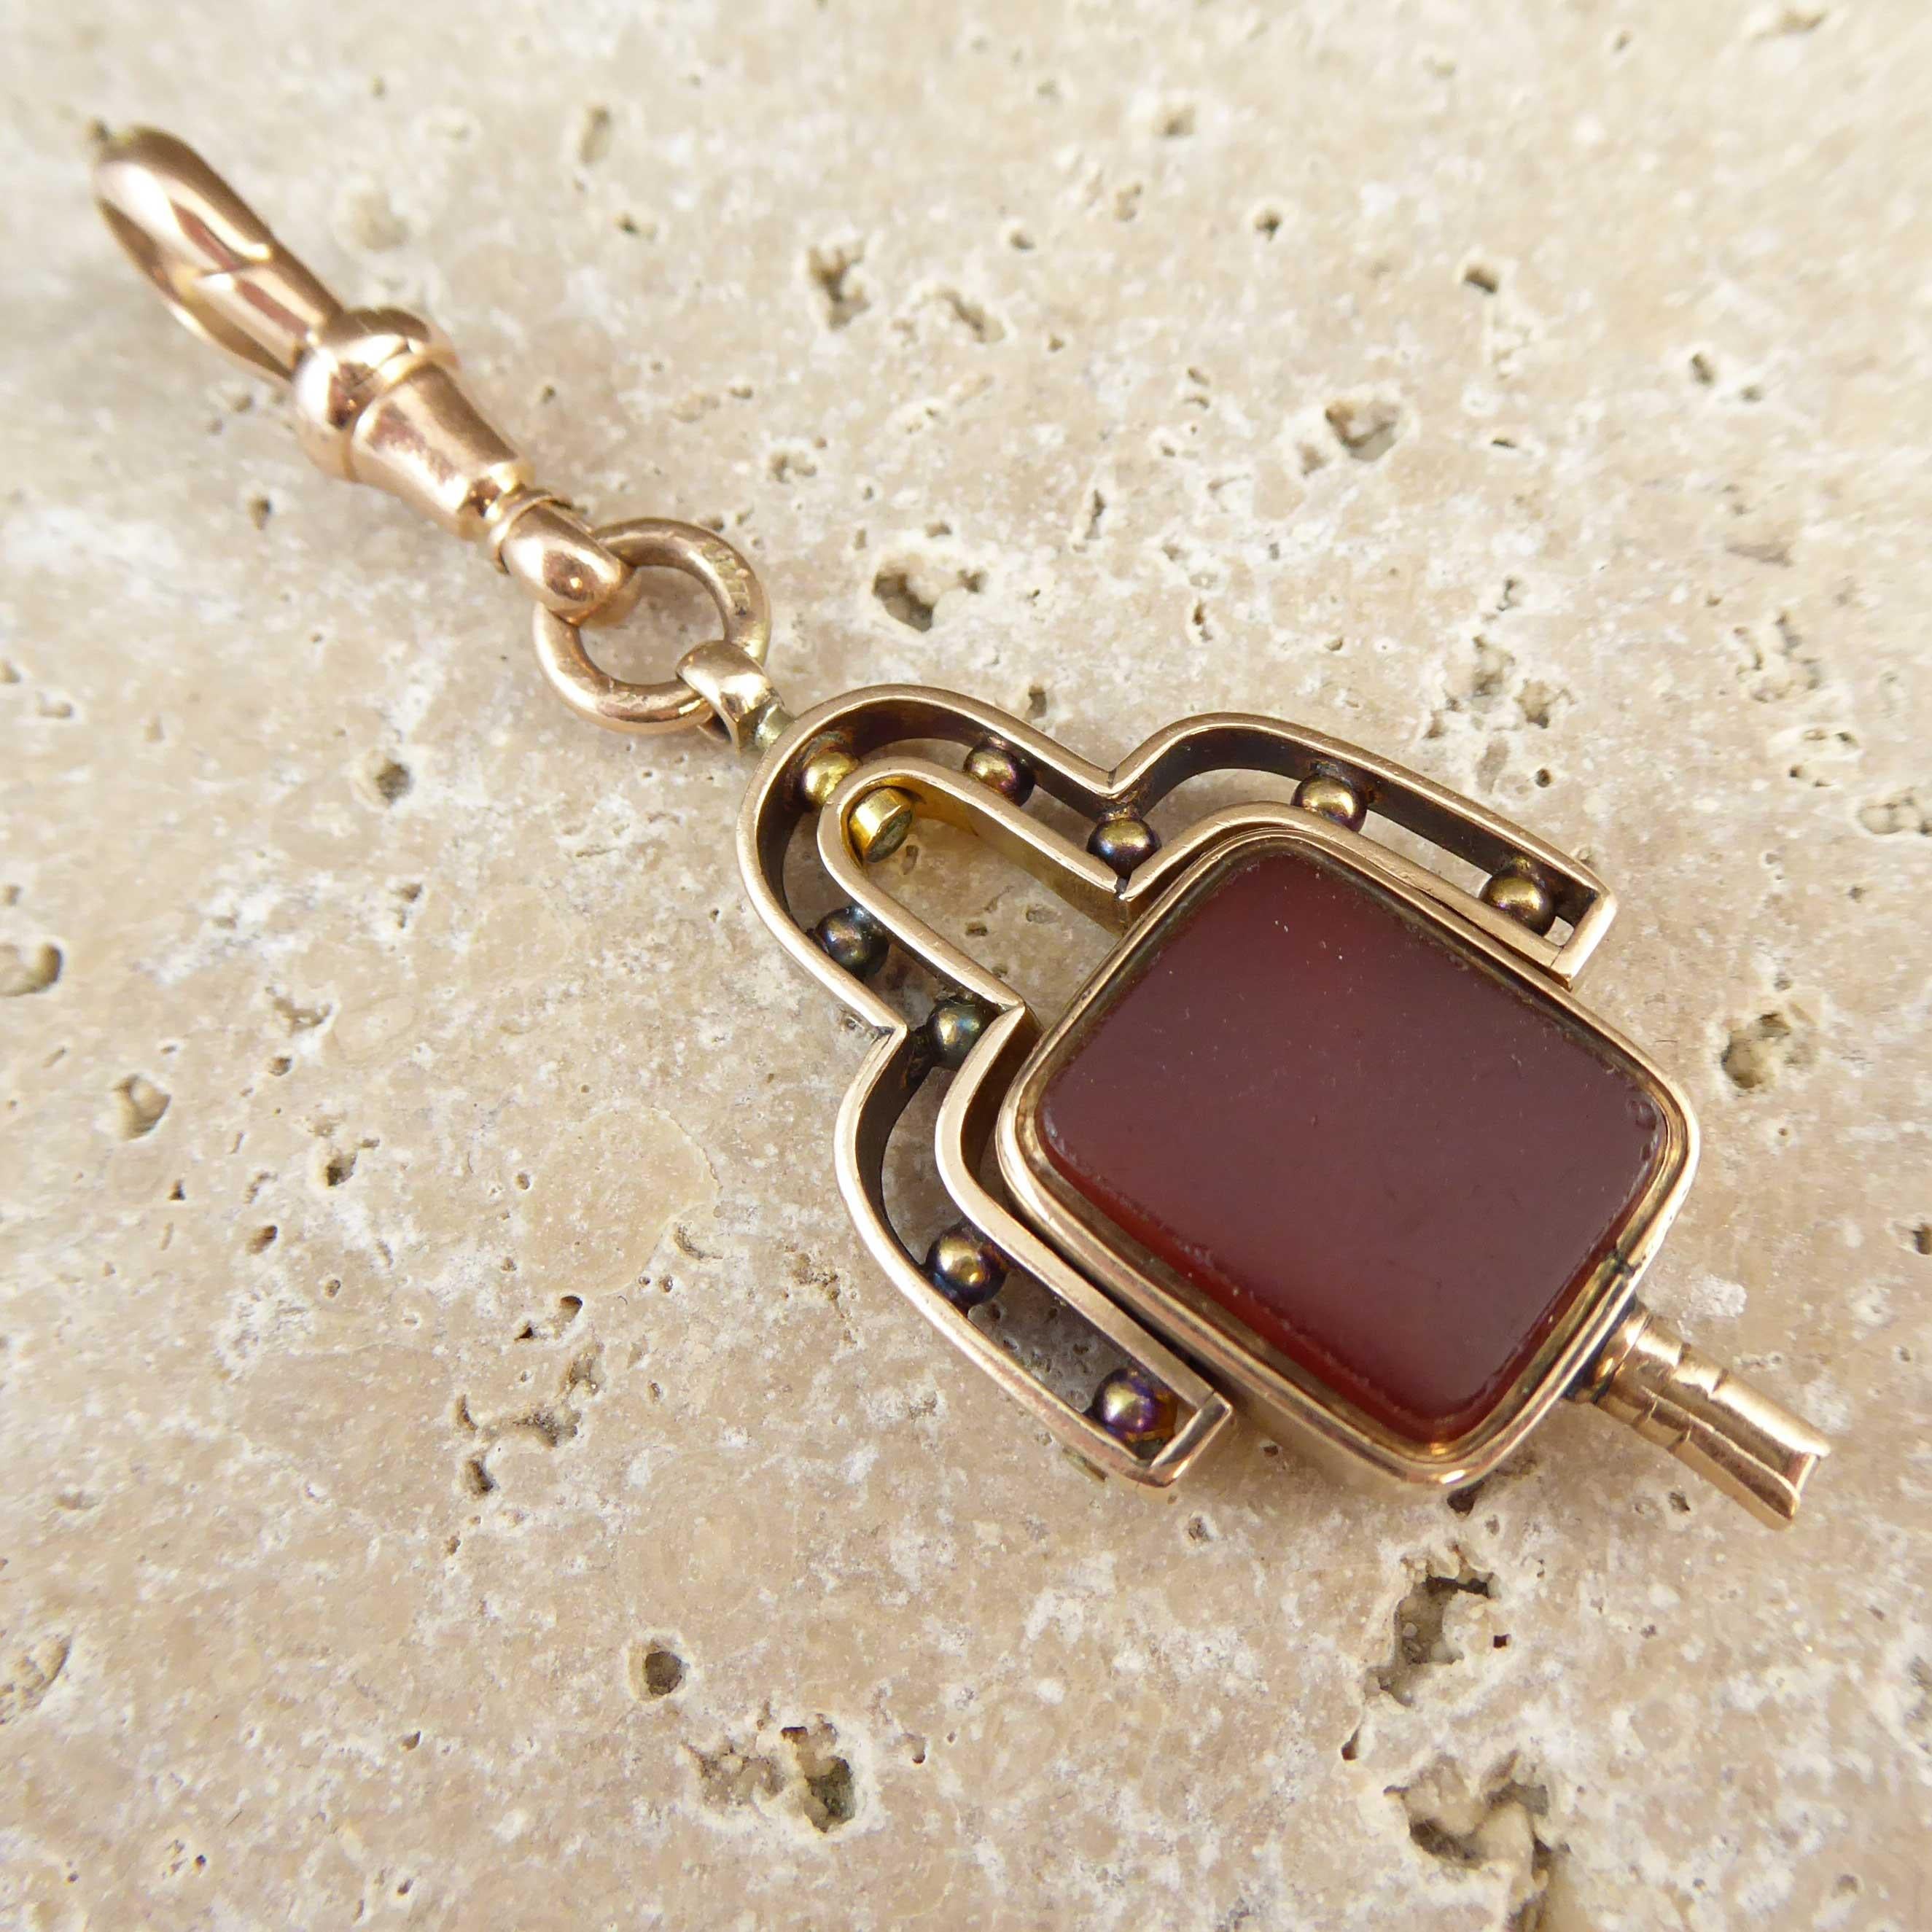 A watch key fob dating from circa 1910s set with the typical cornelian to one side and blood stone to the other.  This lovely example has a rather grand gold frame, the design of which would appear to be veering towards the style of the 1920s. 